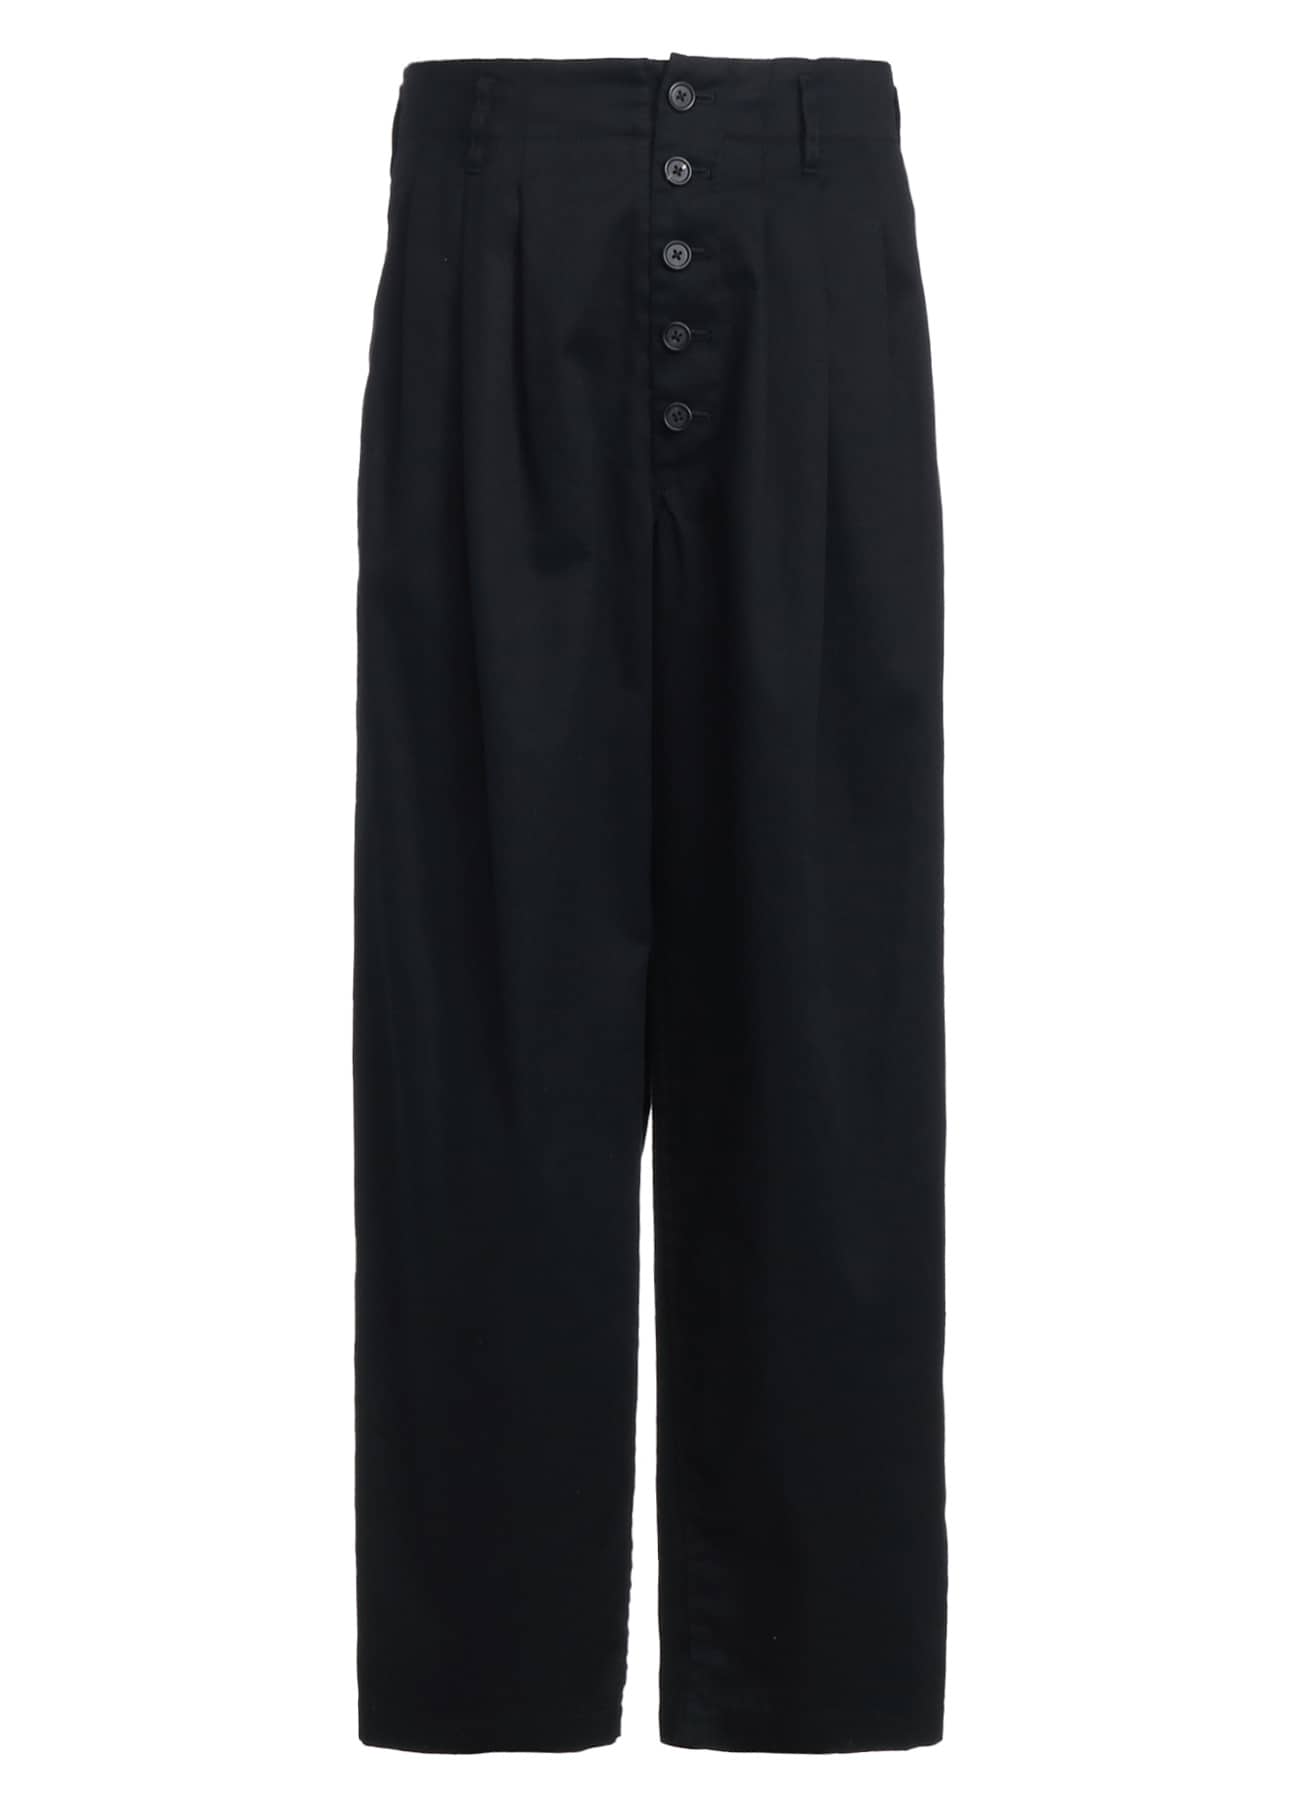 COTTON TWILL 3-TUCK WIDE TROUSERS WITH SIDE STRIPES